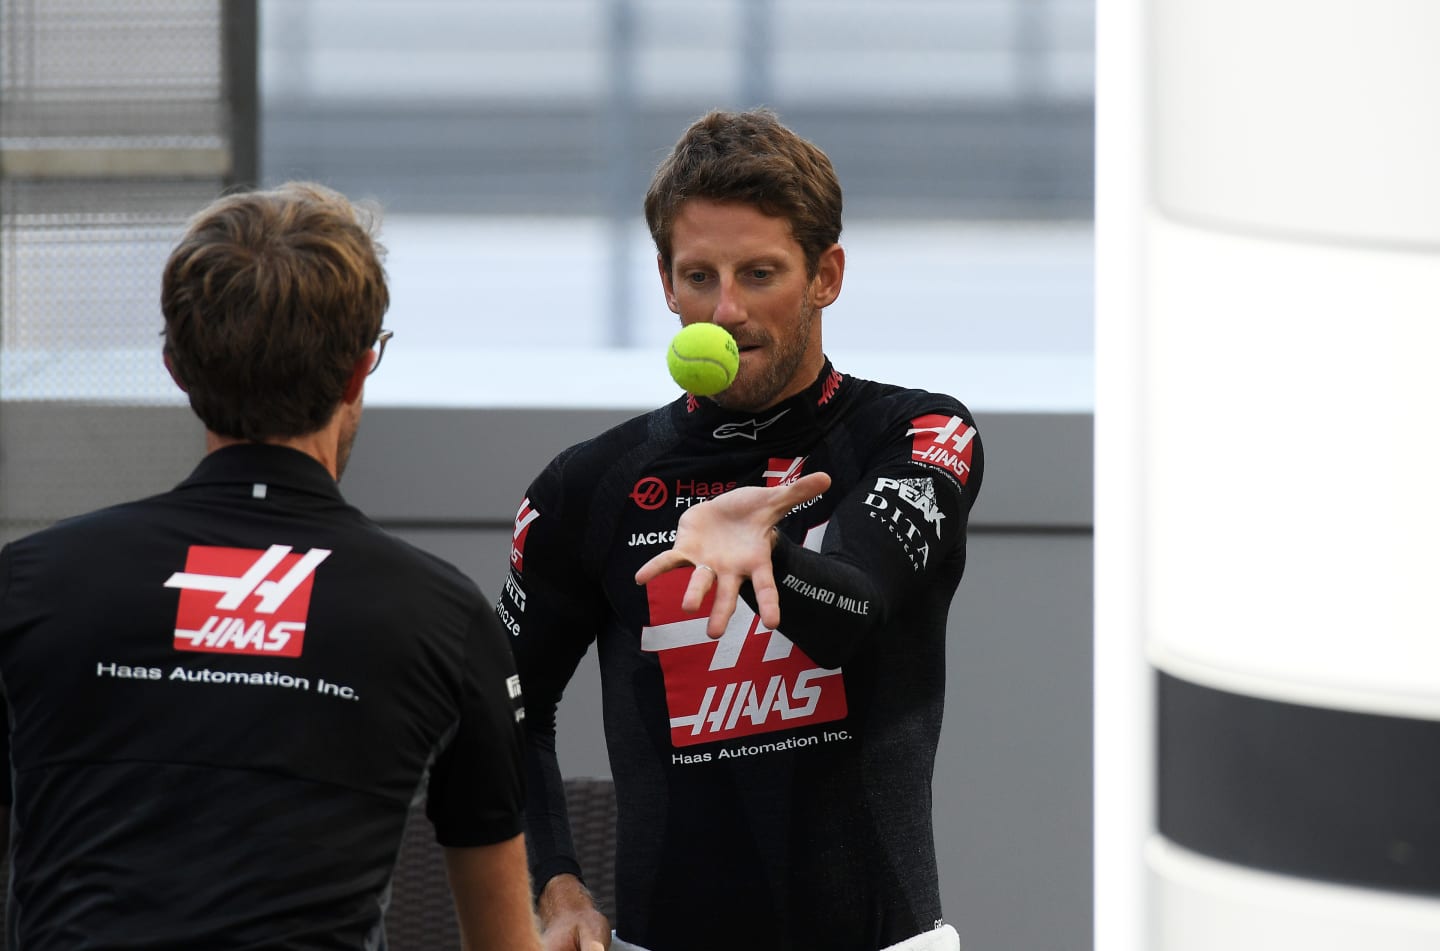 SOCHI, RUSSIA - SEPTEMBER 25: Romain Grosjean of France and Haas F1 prepares to drive during practice ahead of the F1 Grand Prix of Russia at Sochi Autodrom on September 25, 2020 in Sochi, Russia. (Photo by Kirill Kudryavtsev - Pool/Getty Images)